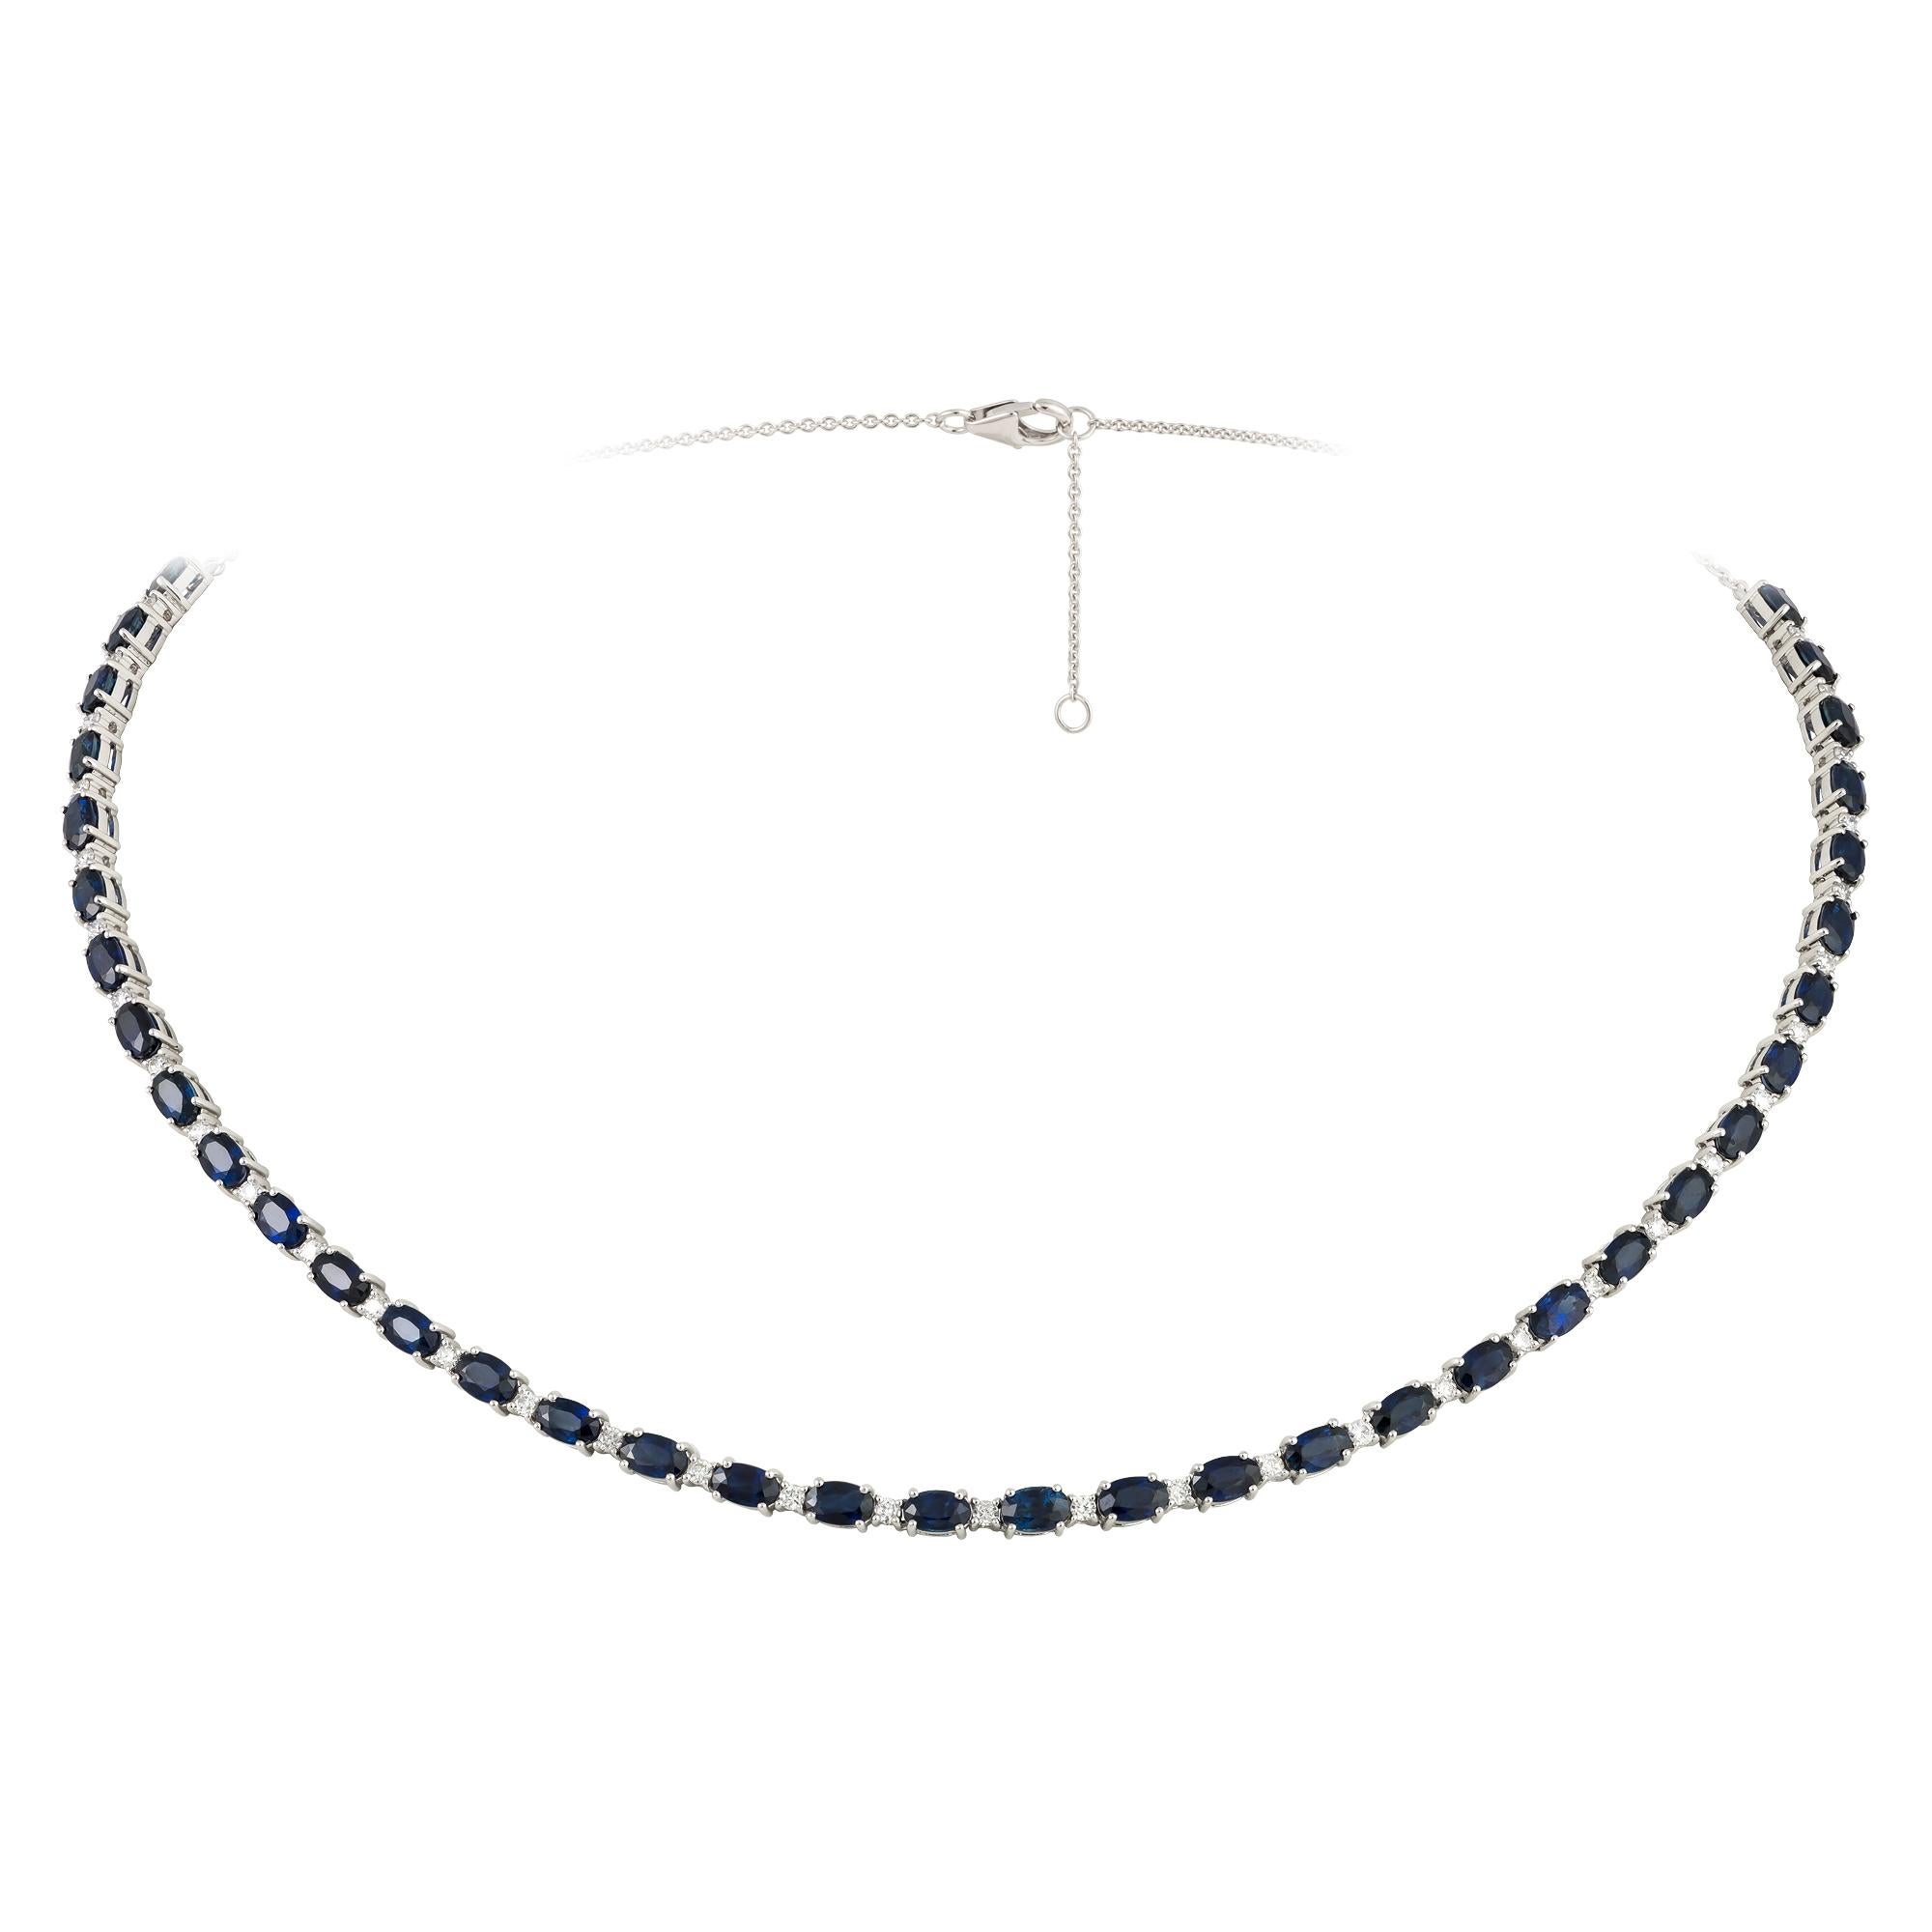 The Following Item we are offering is a Rare Important Radiant 18KT Gold Rare Gorgeous Fancy Blue Sapphire Diamond Necklace. Necklace is comprised of a Gorgeous Array of Fancy Blue Sapphires with Diamonds!!! T.C.W. Approx 12.50CTS!!! This Gorgeous